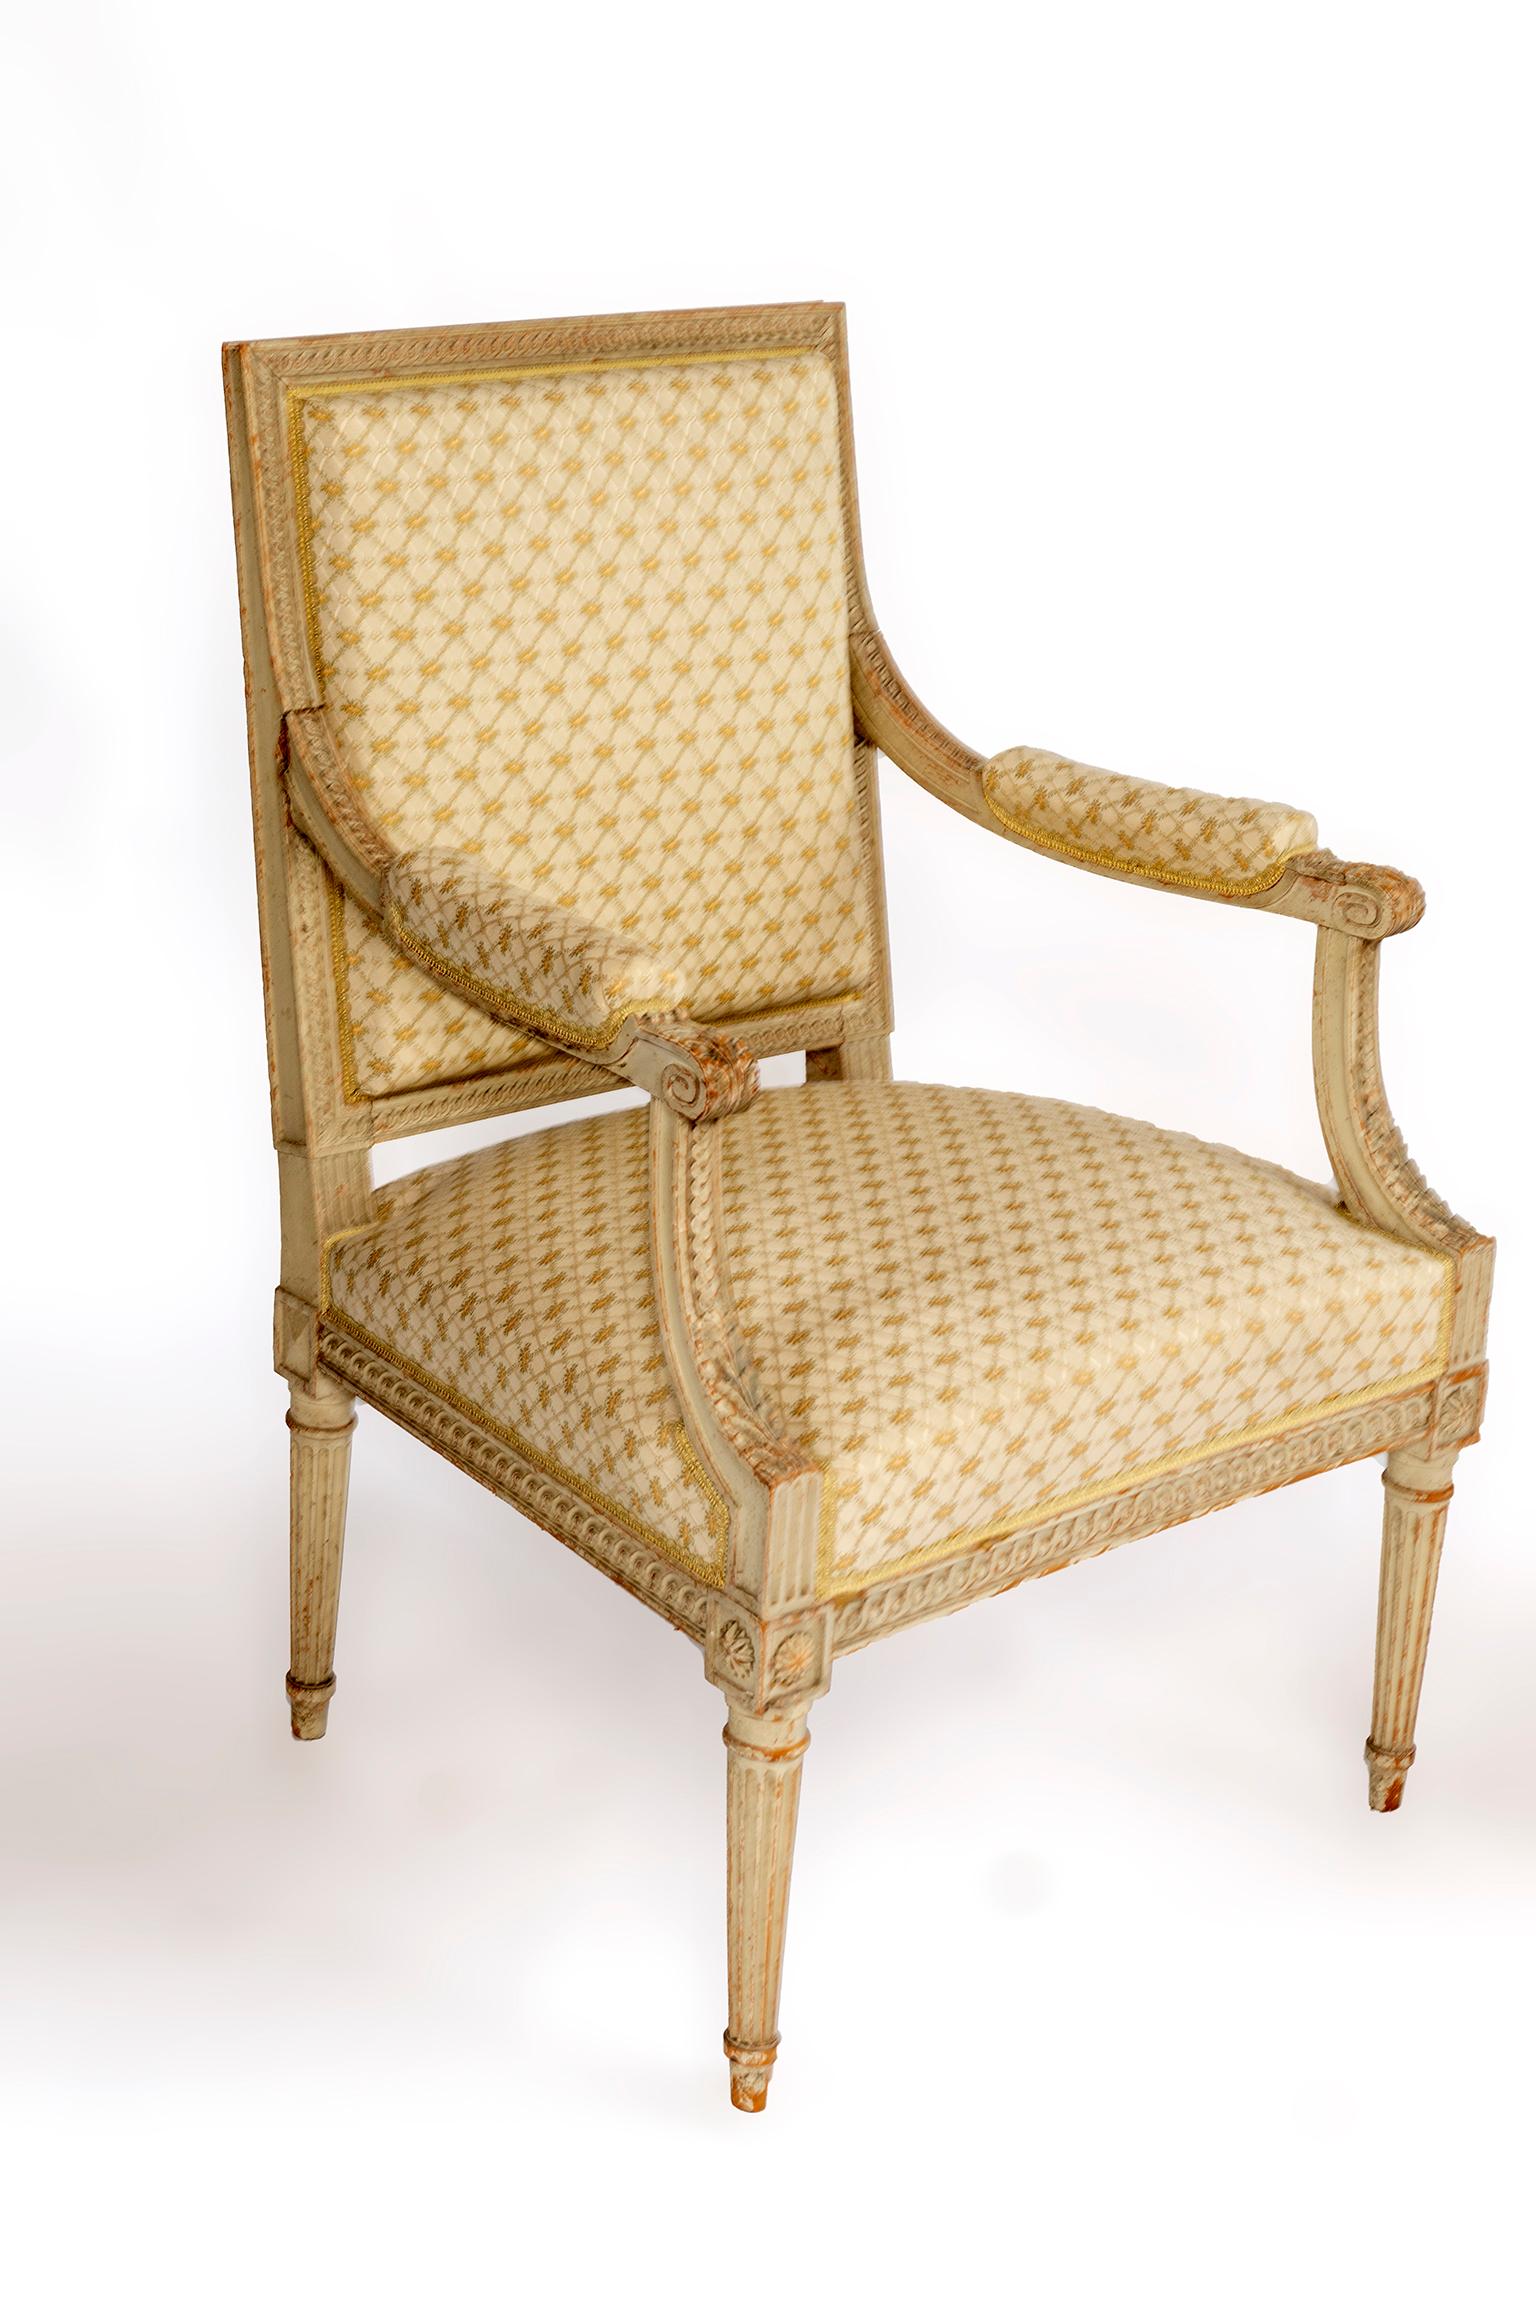 Pair of 18th Century Louis XVI Fauteuils with detailed hand carving and fluted legs.